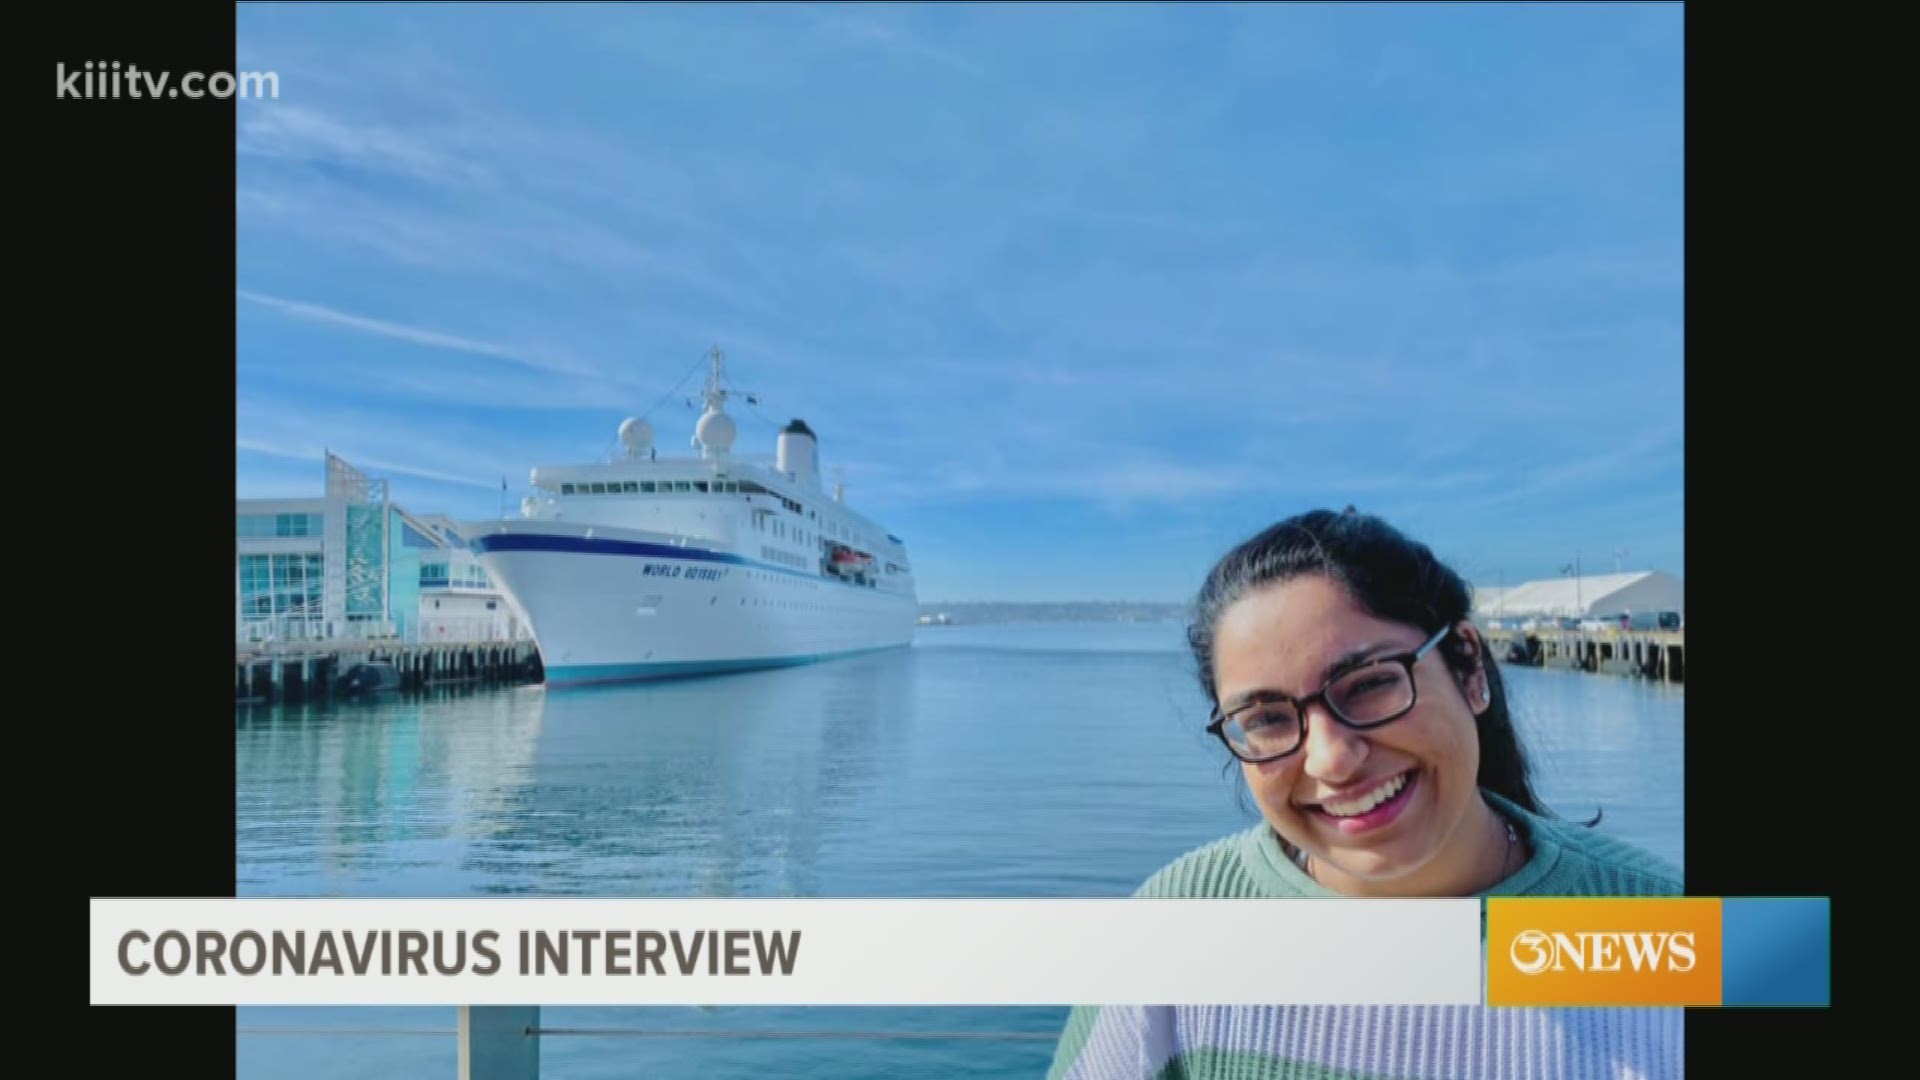 Saherish Surani is studying overseas in Japan aboard a cruise liner but has not been able to reach port since January due to coronavirus concerns.